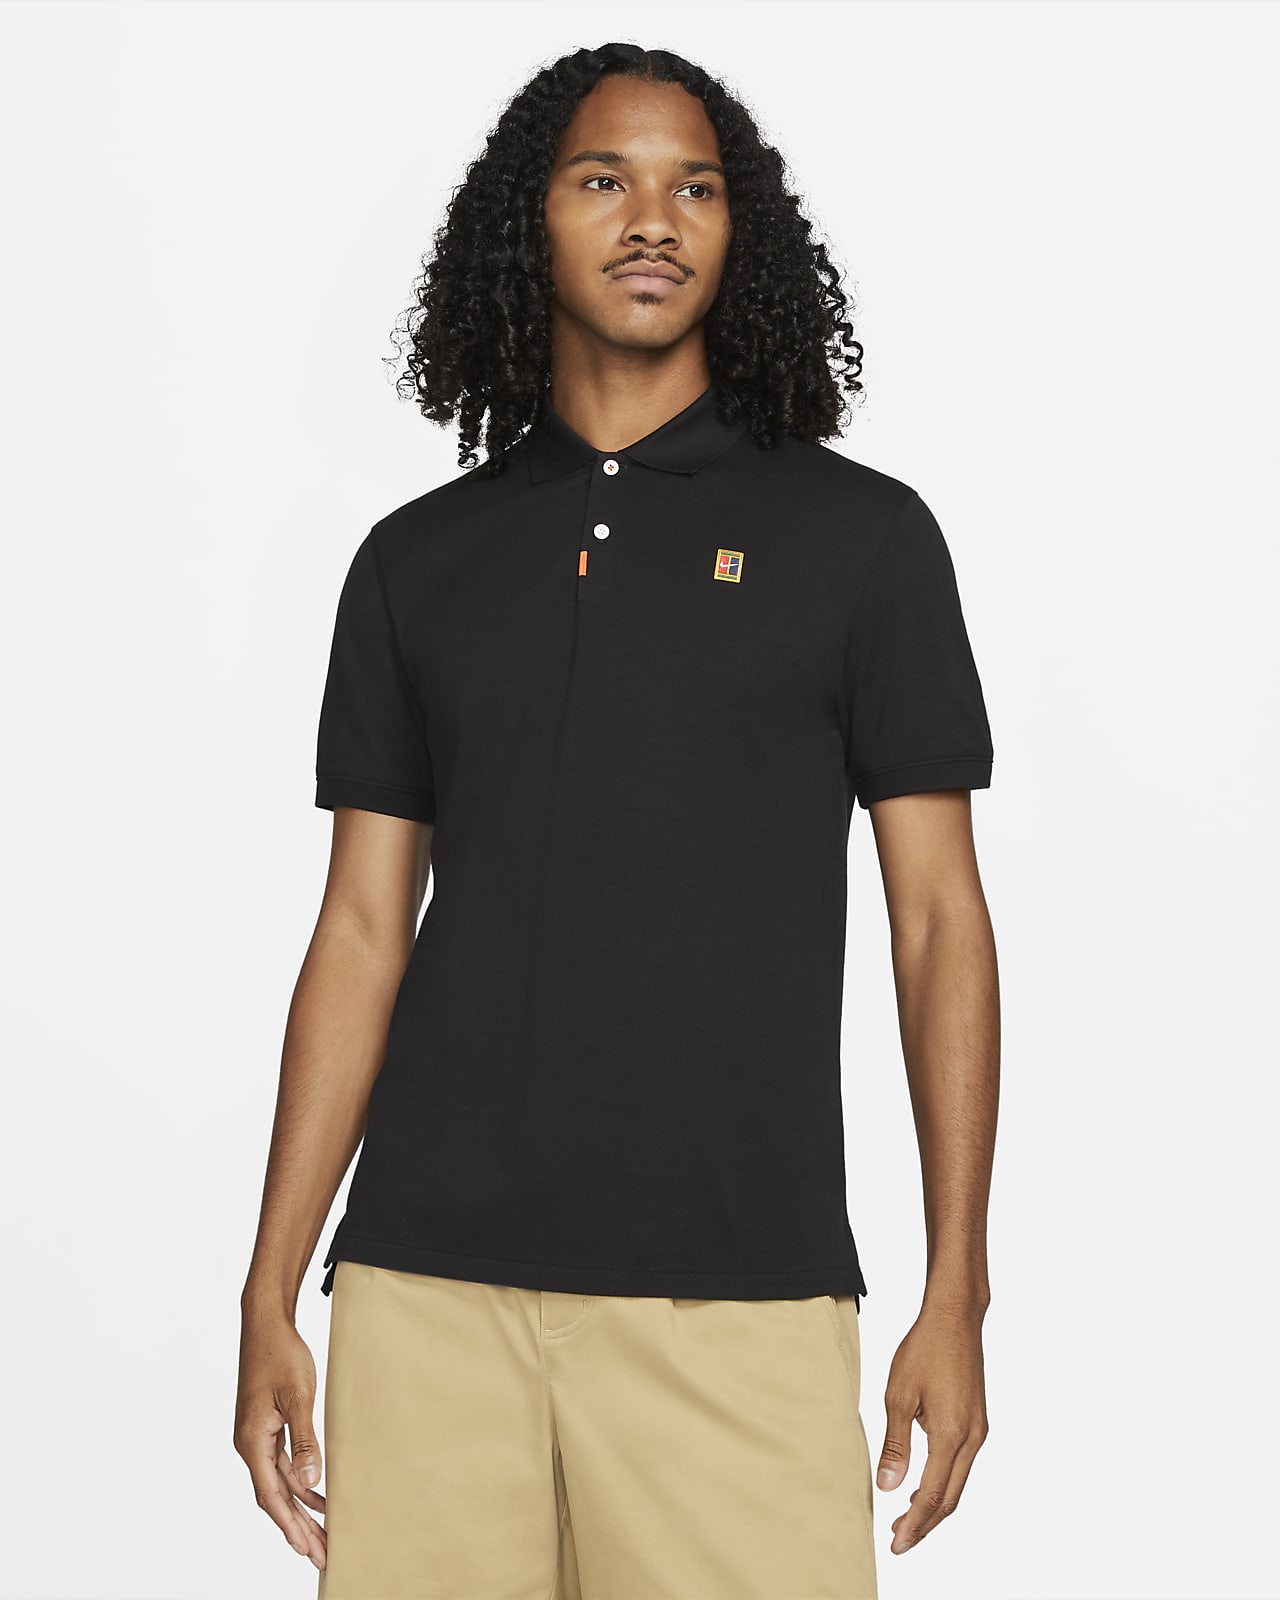 The Nike Polo Men's Slim-Fit Polo